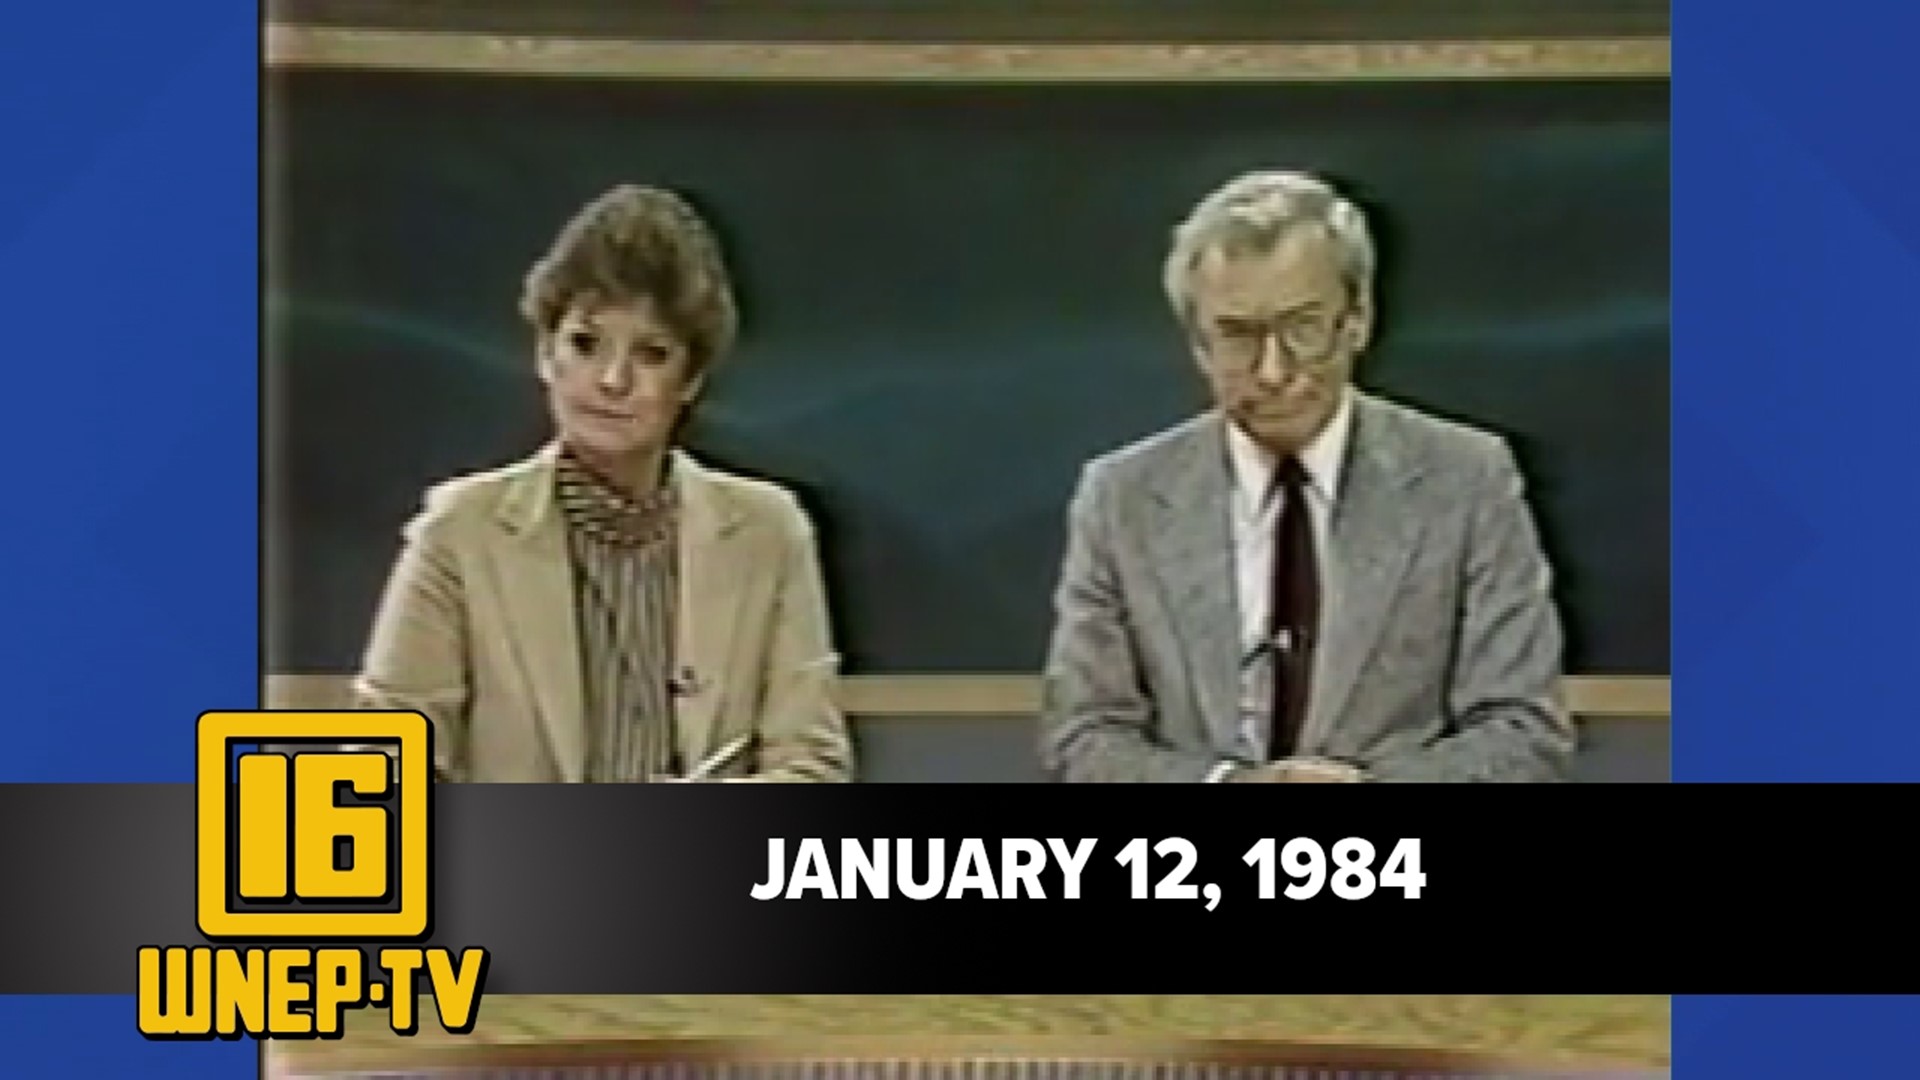 Join Karen Harch and Nolan Johannes with curated stories from January 12, 1984.